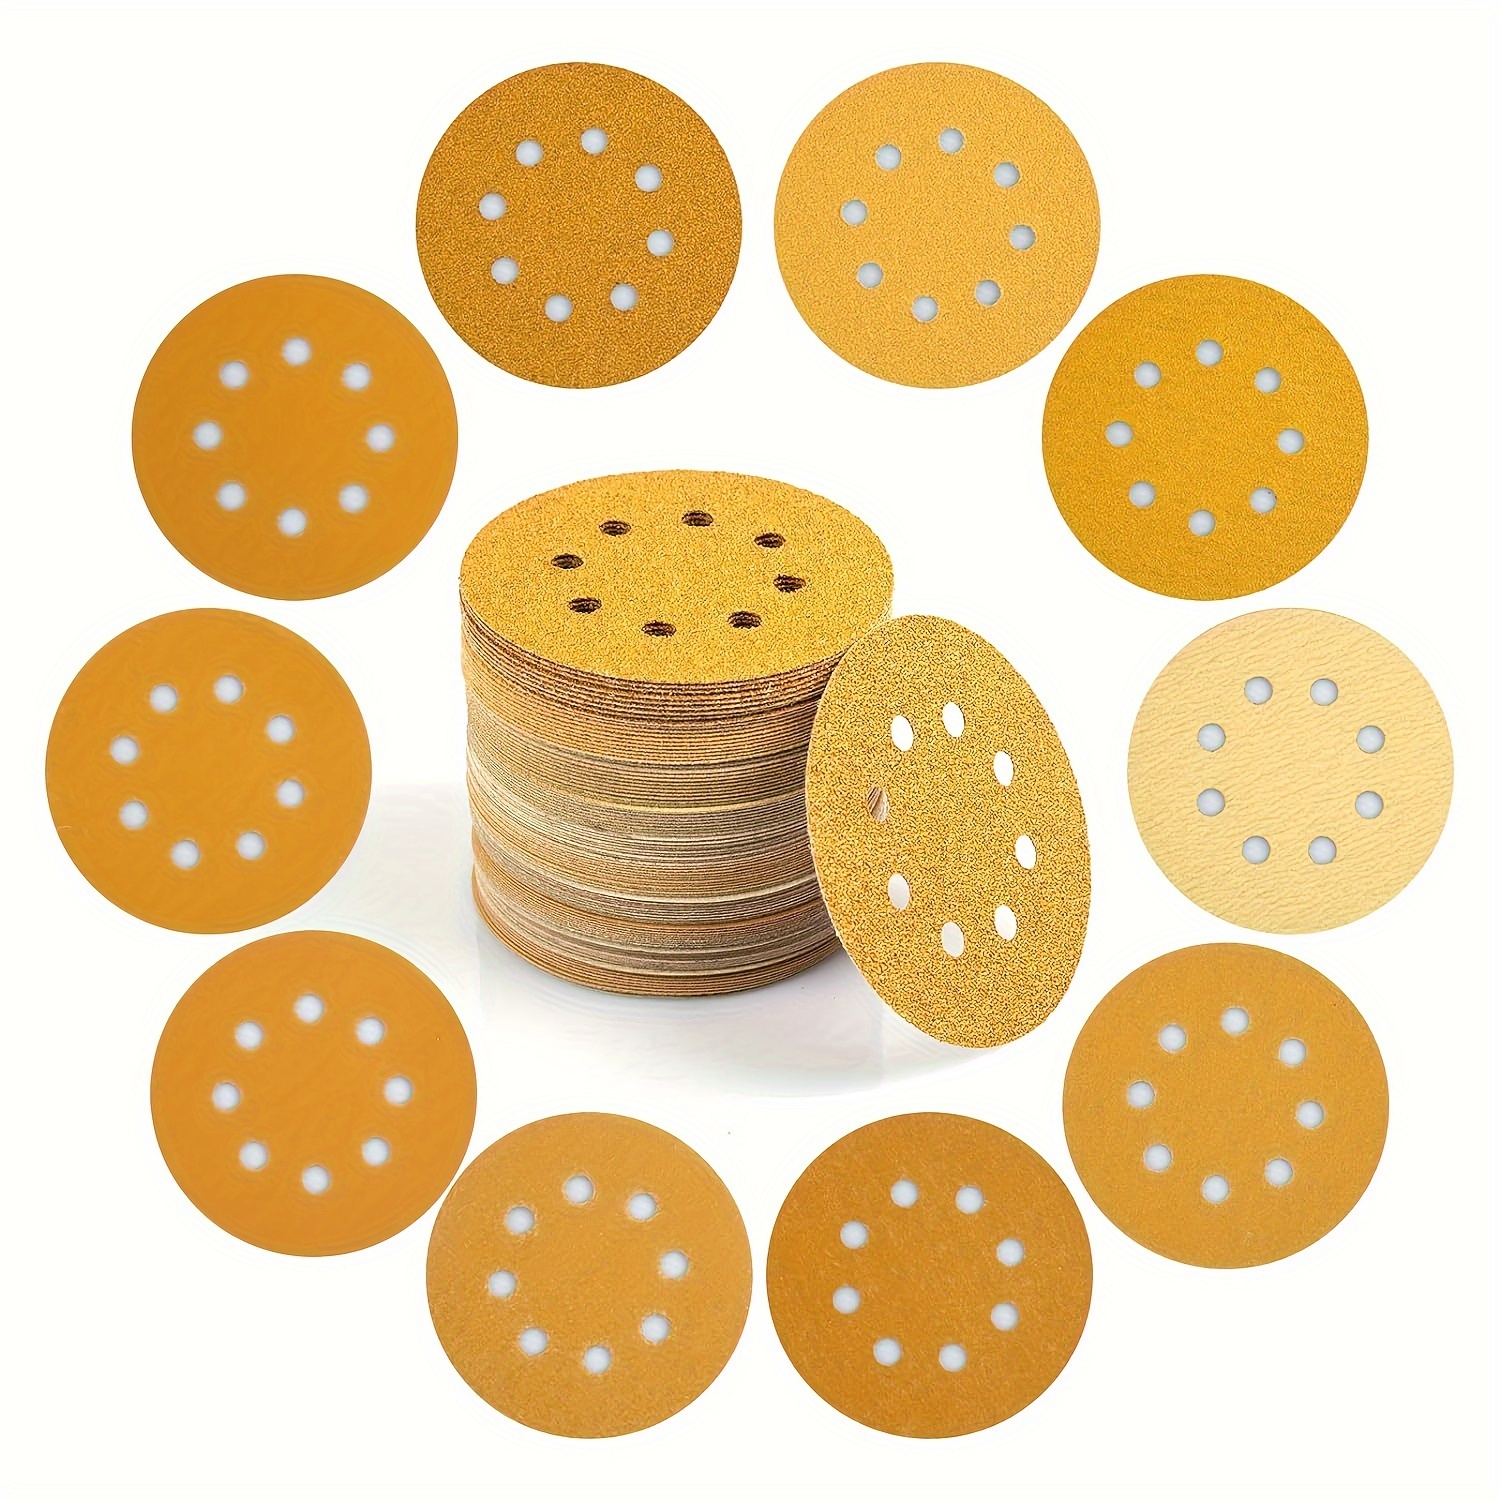 5-inch 8 Hole Hook-and-Loop Sanding Discs - Value Pack, 100 PCS